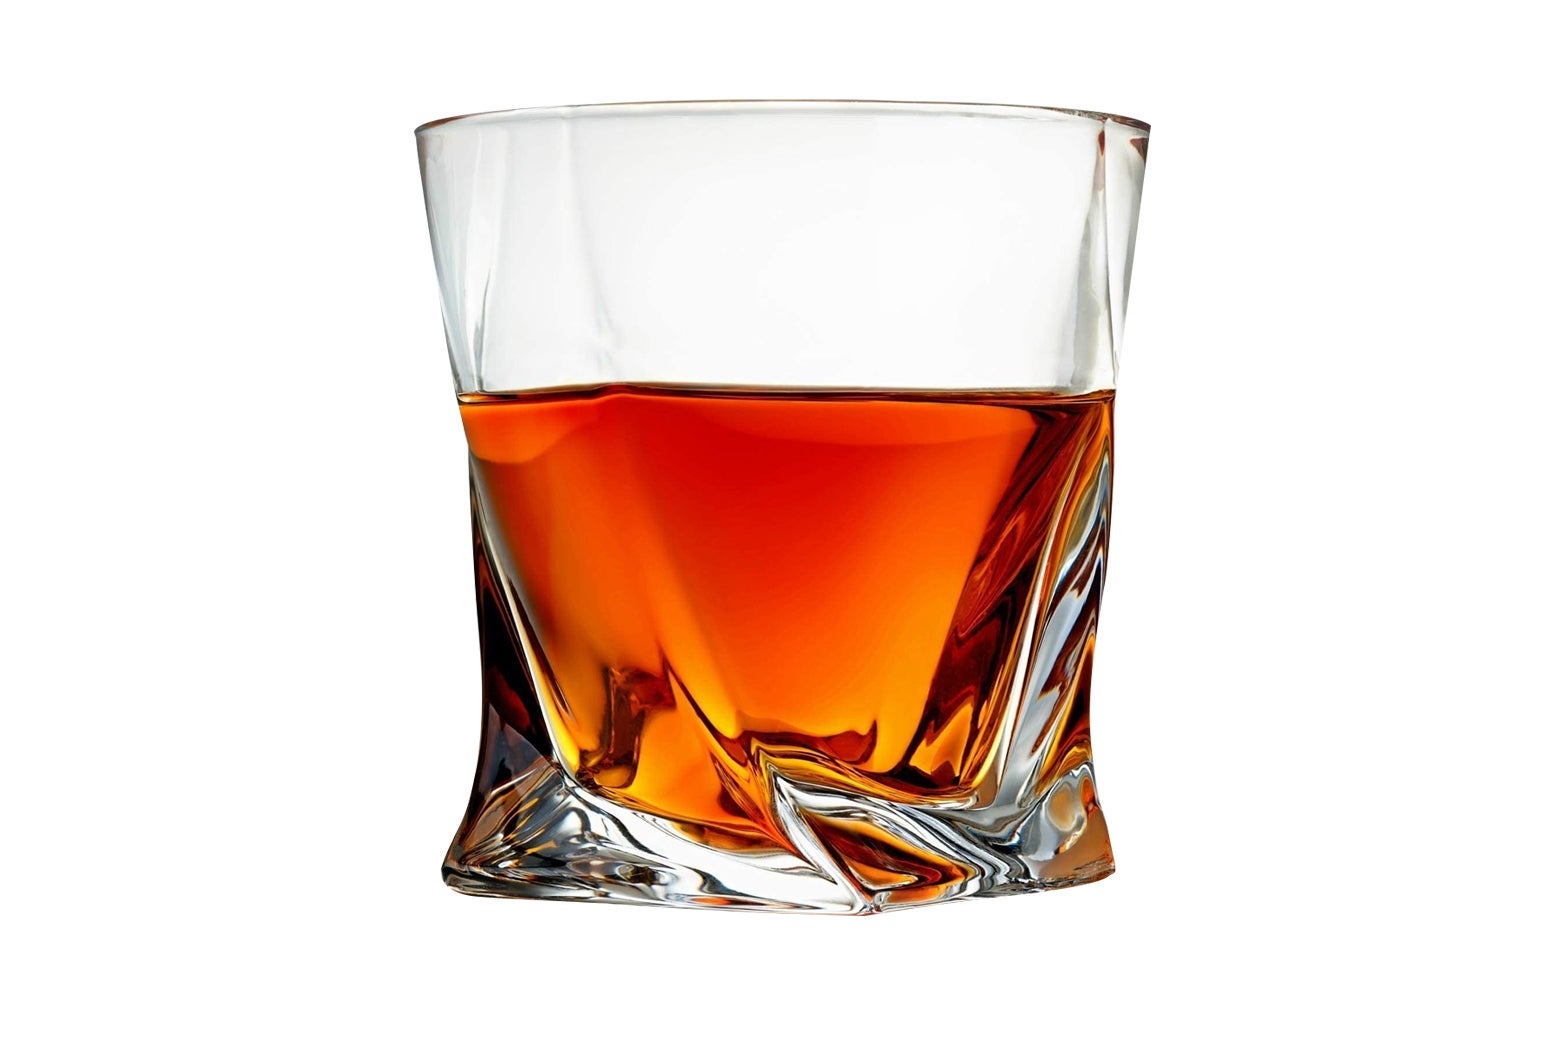 A glass with whiskey in it.